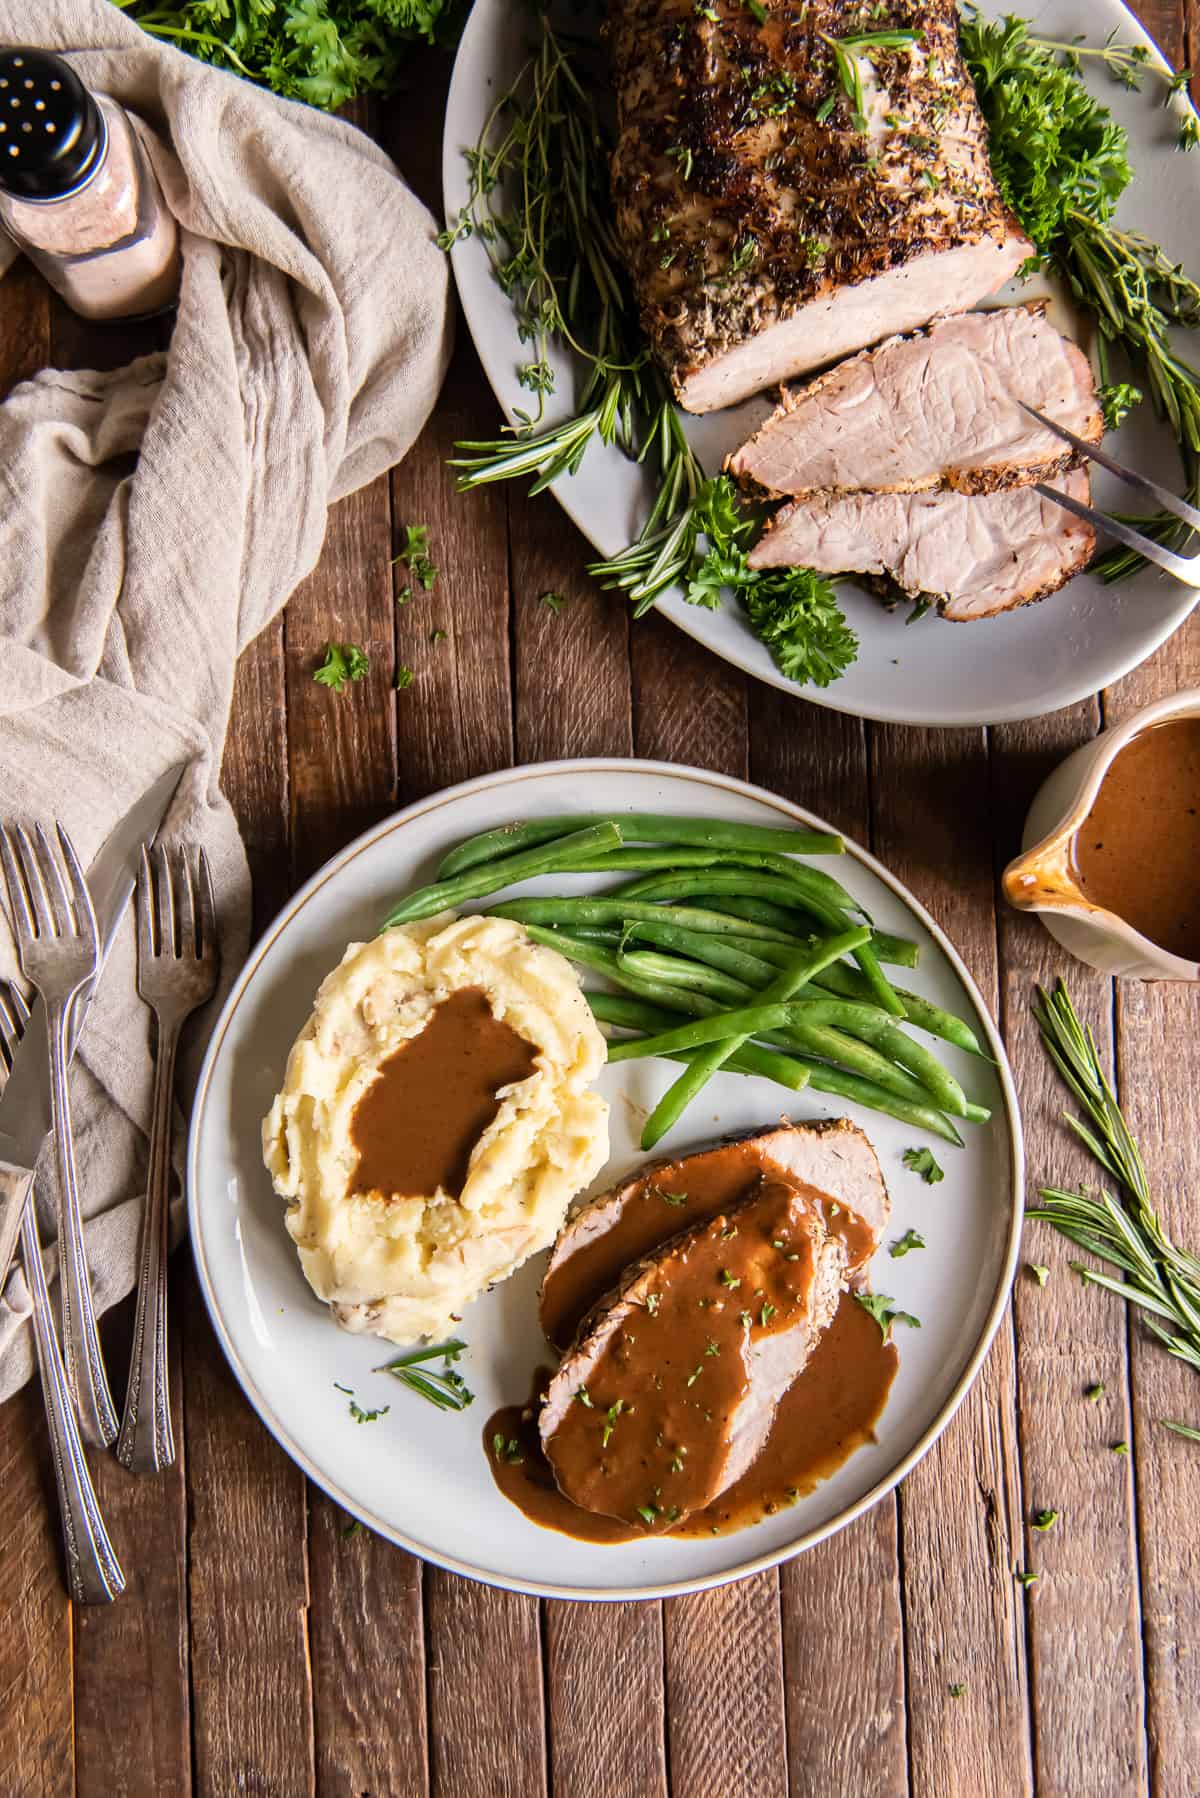 Pork loin roast with gravy on a white plate with potatoes and green beans.